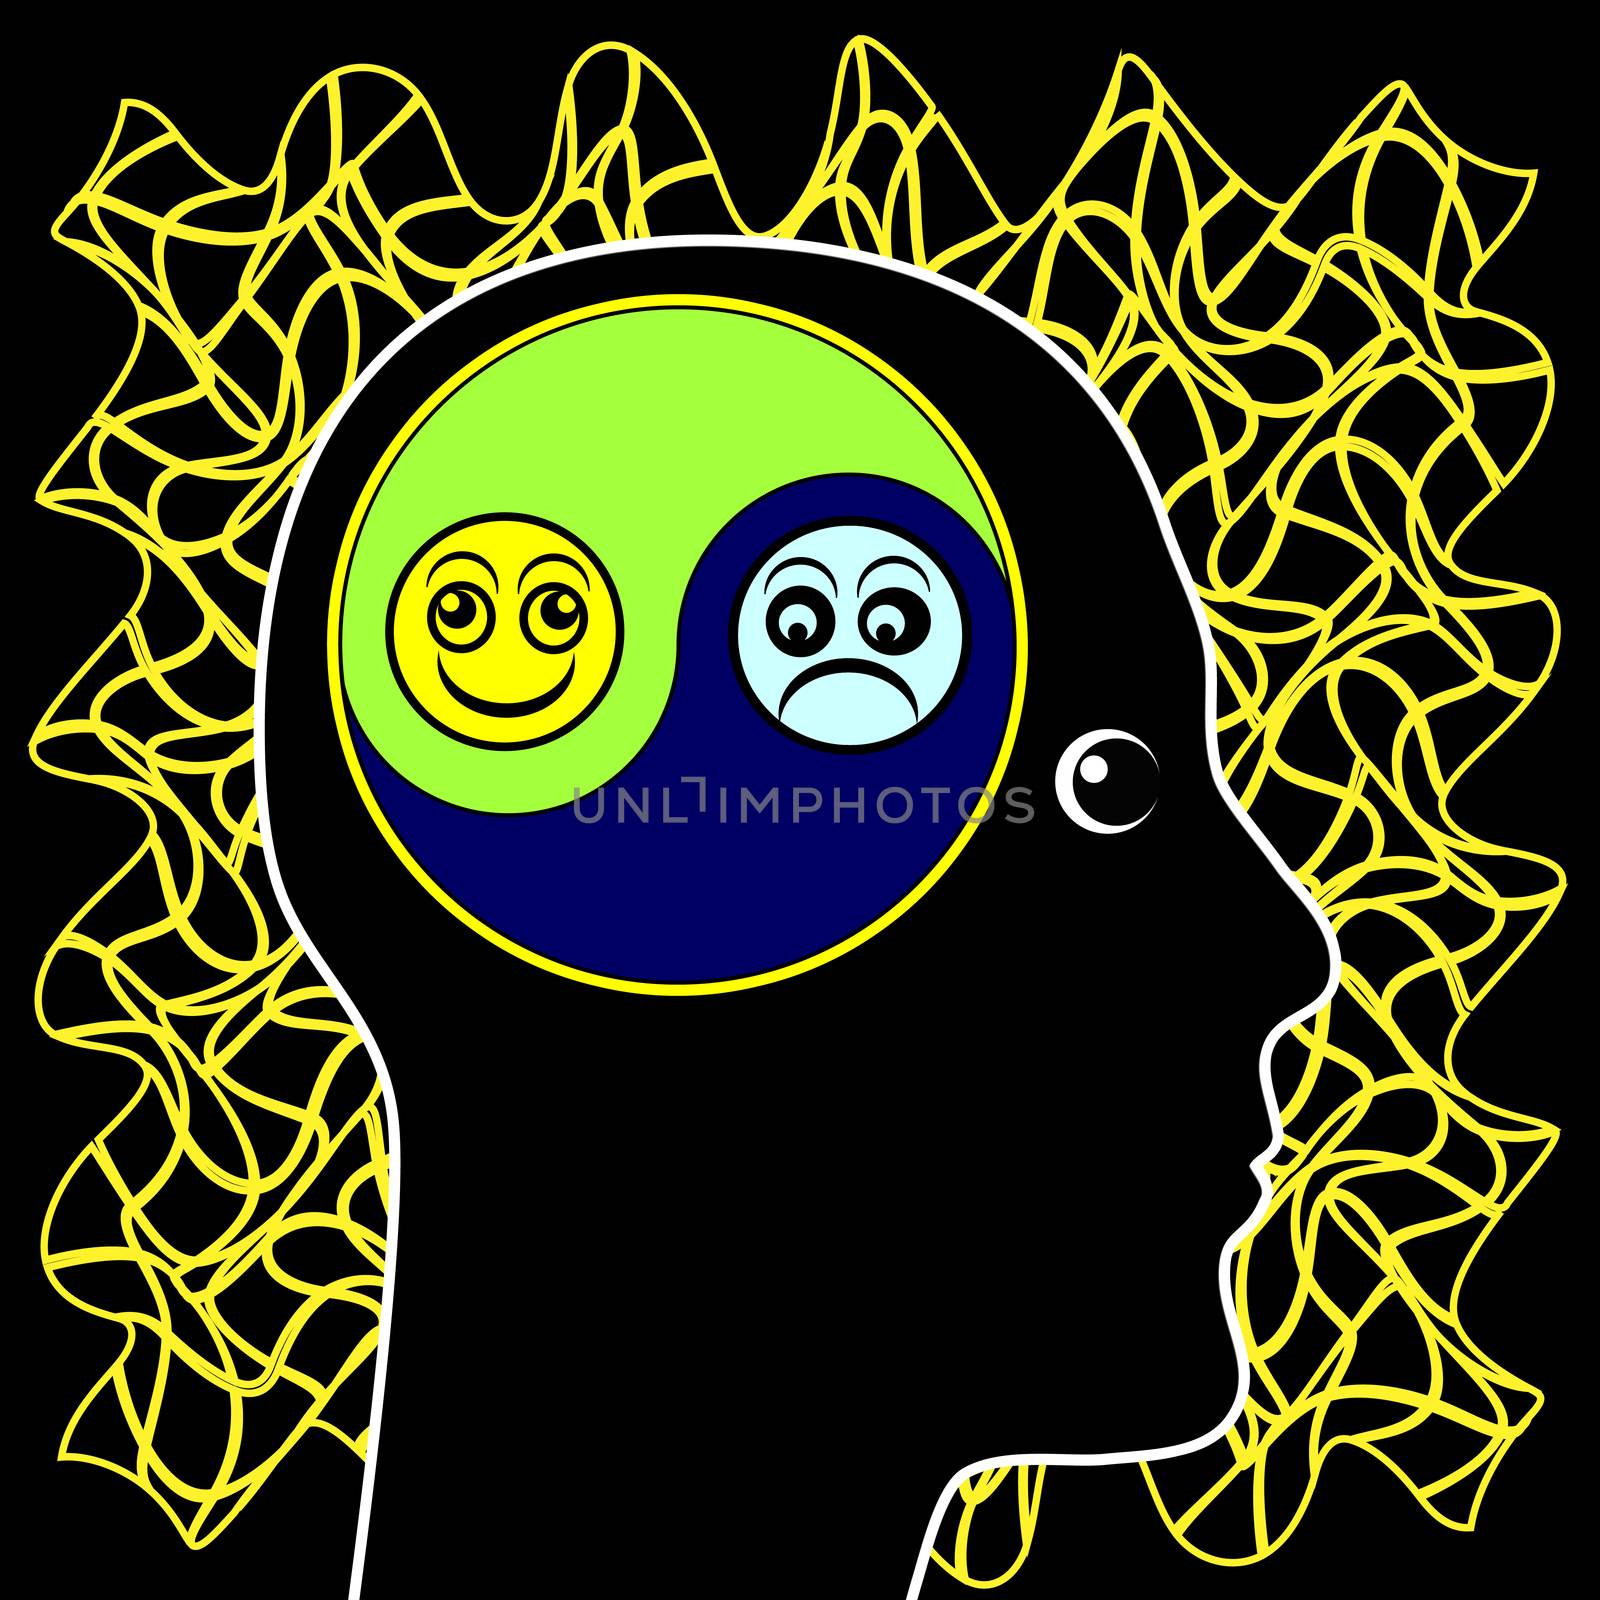 Alternation of the emotional state between euphoria and depression as part of bipolar disorder